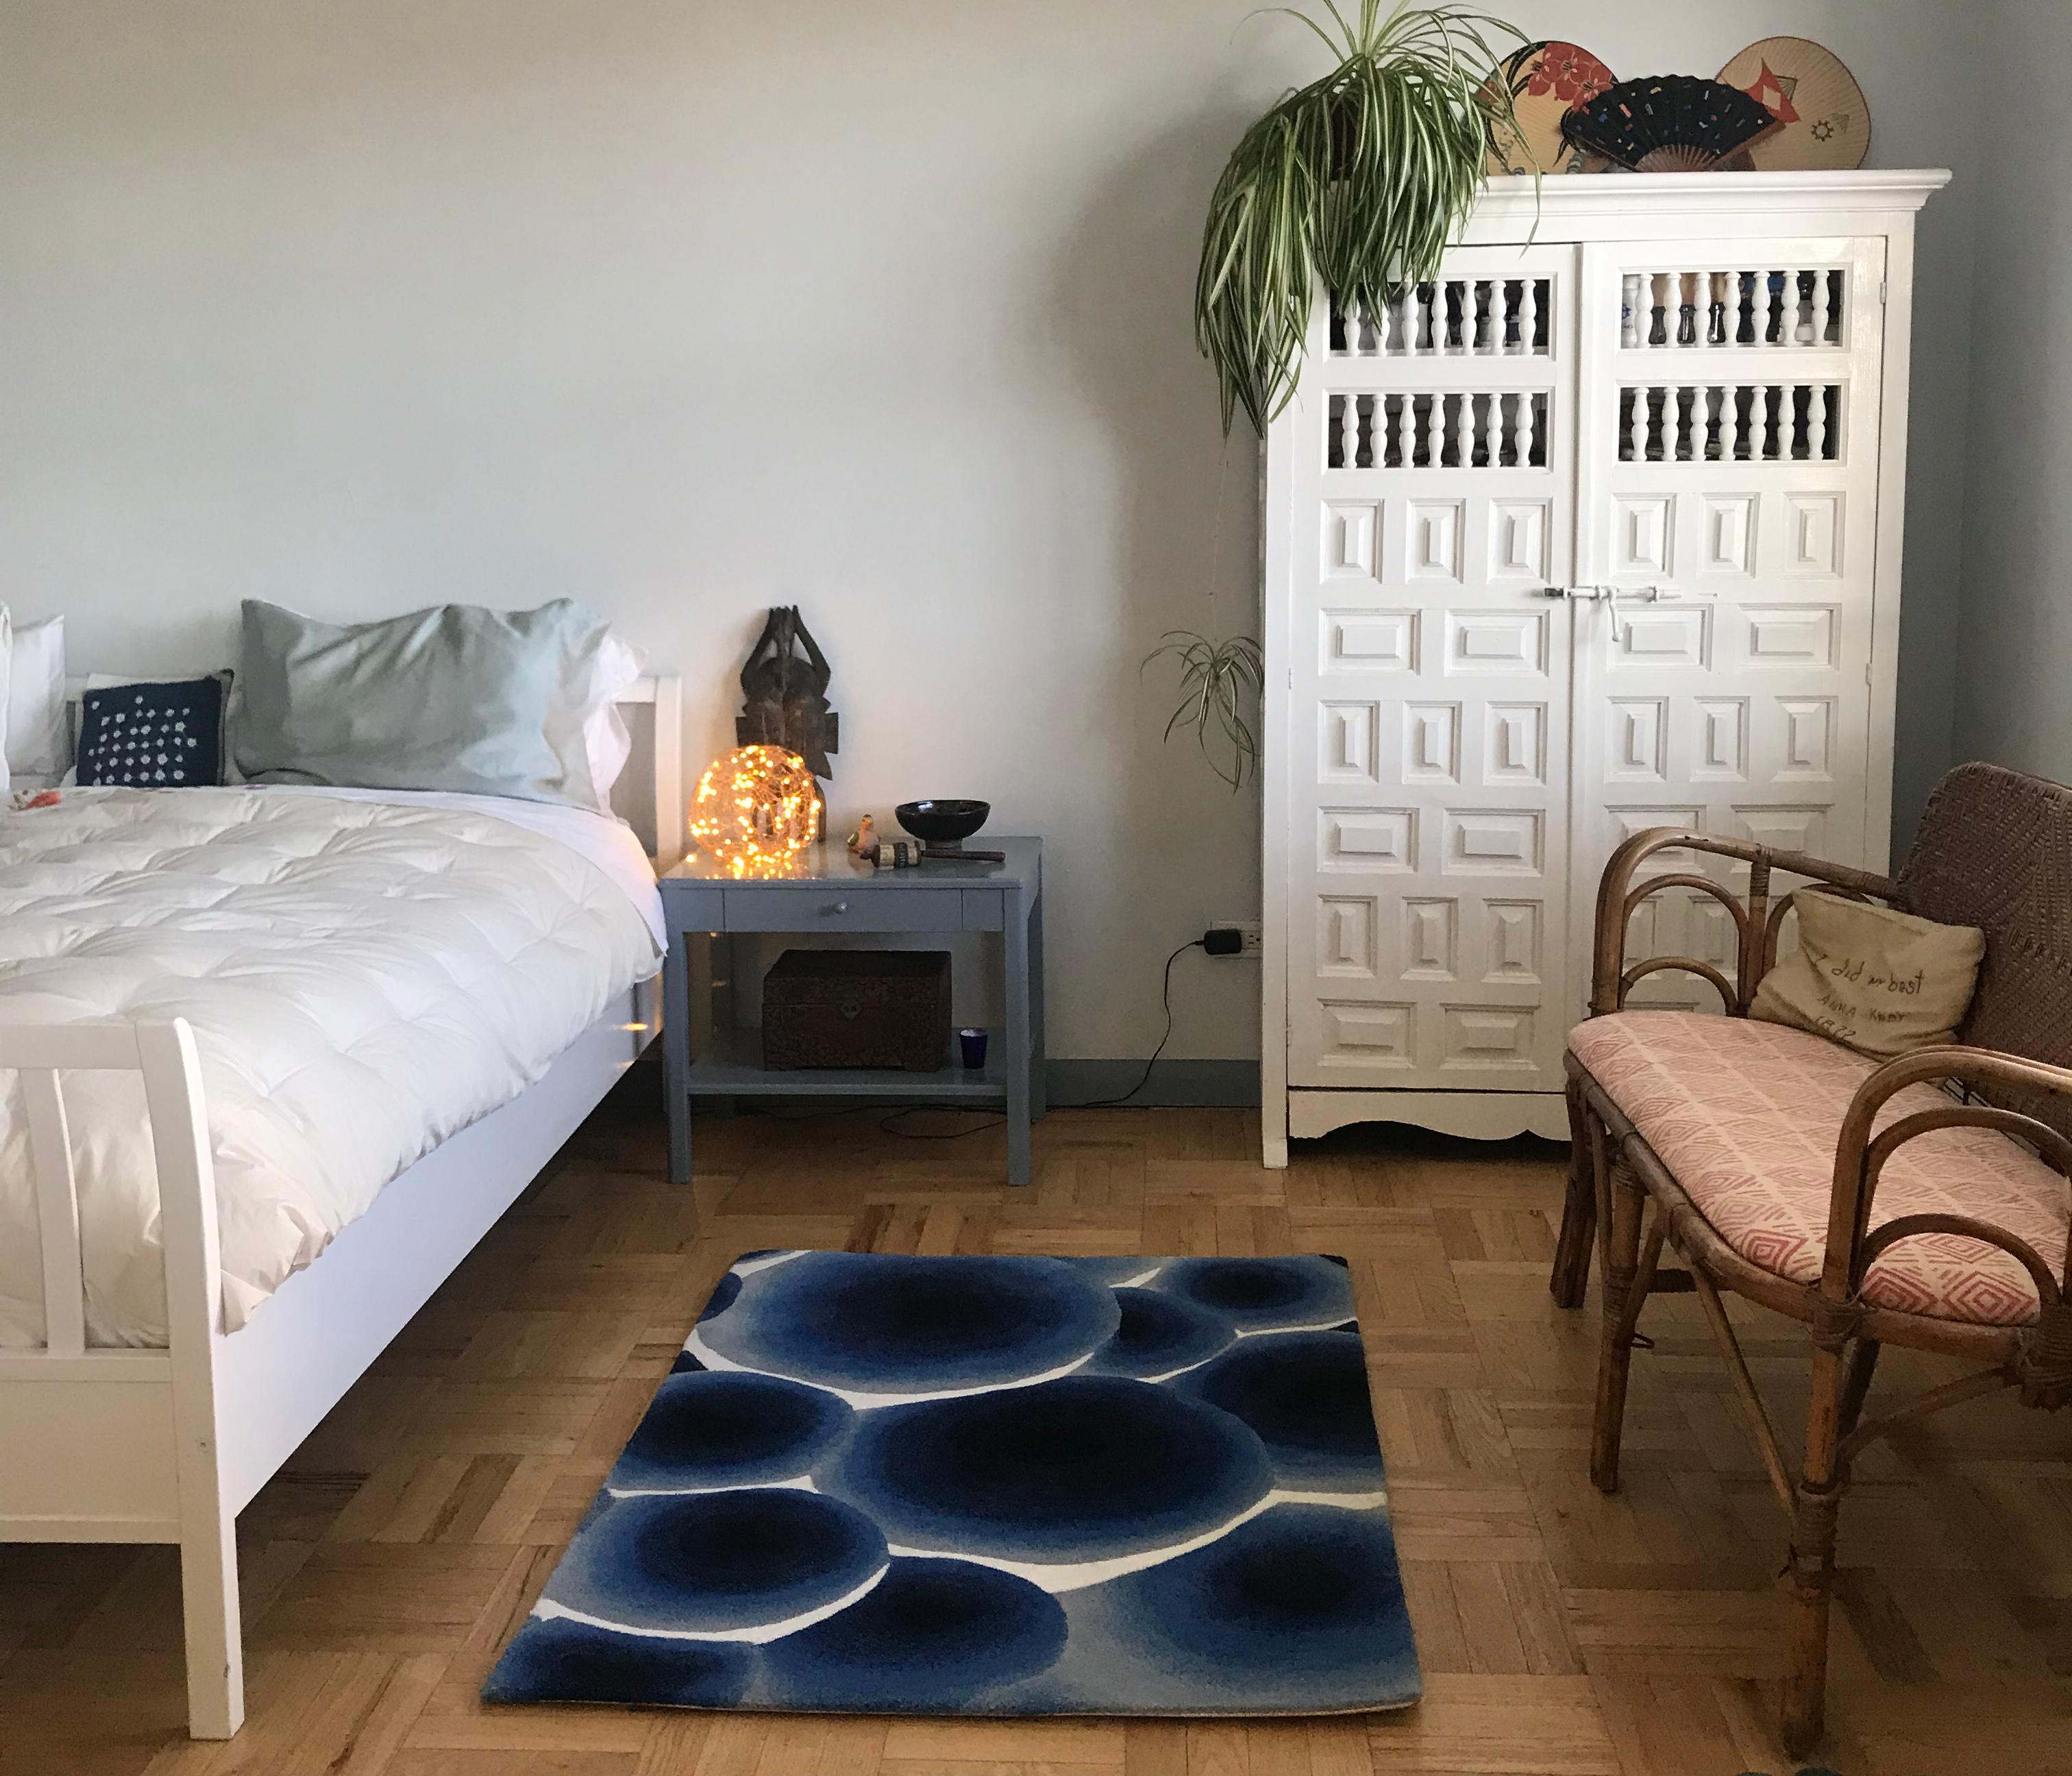 Cells Handmade Wool Blue and White Rectangle Rug by Marre Moerel for Groundplans im Zustand „Neu“ im Angebot in New York, NY